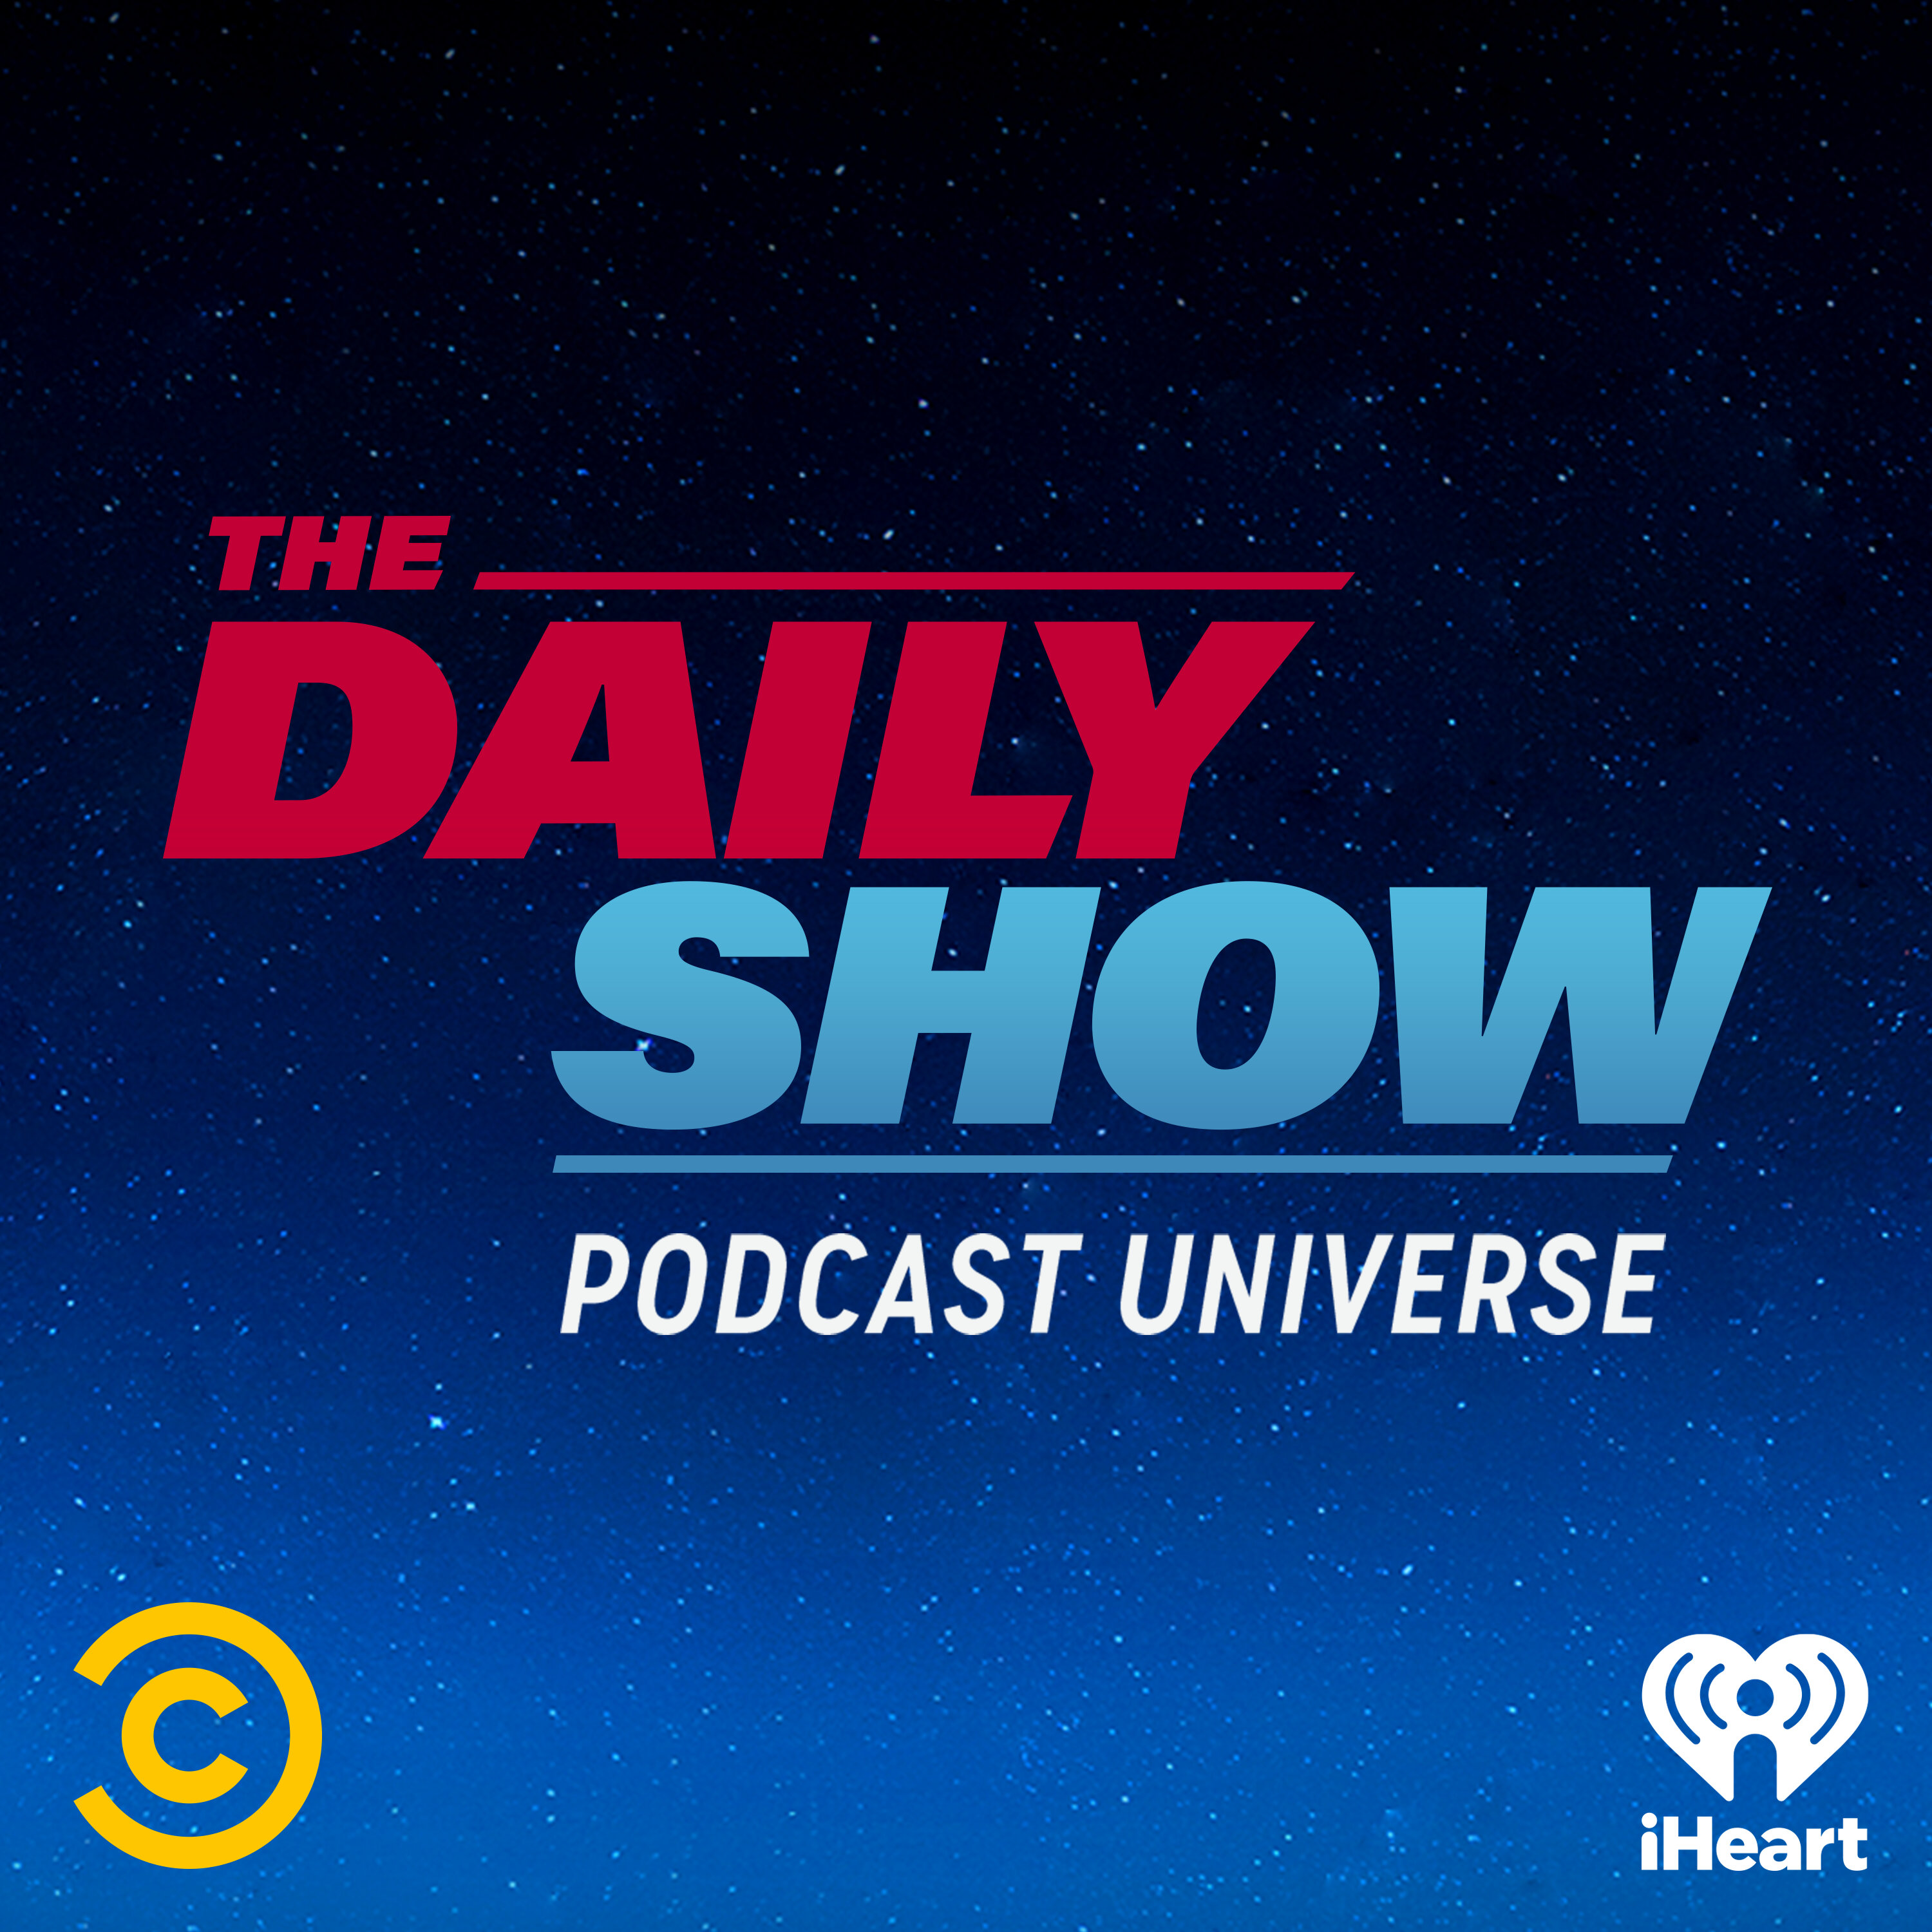 Introducing The Daily Show Podcast Universe